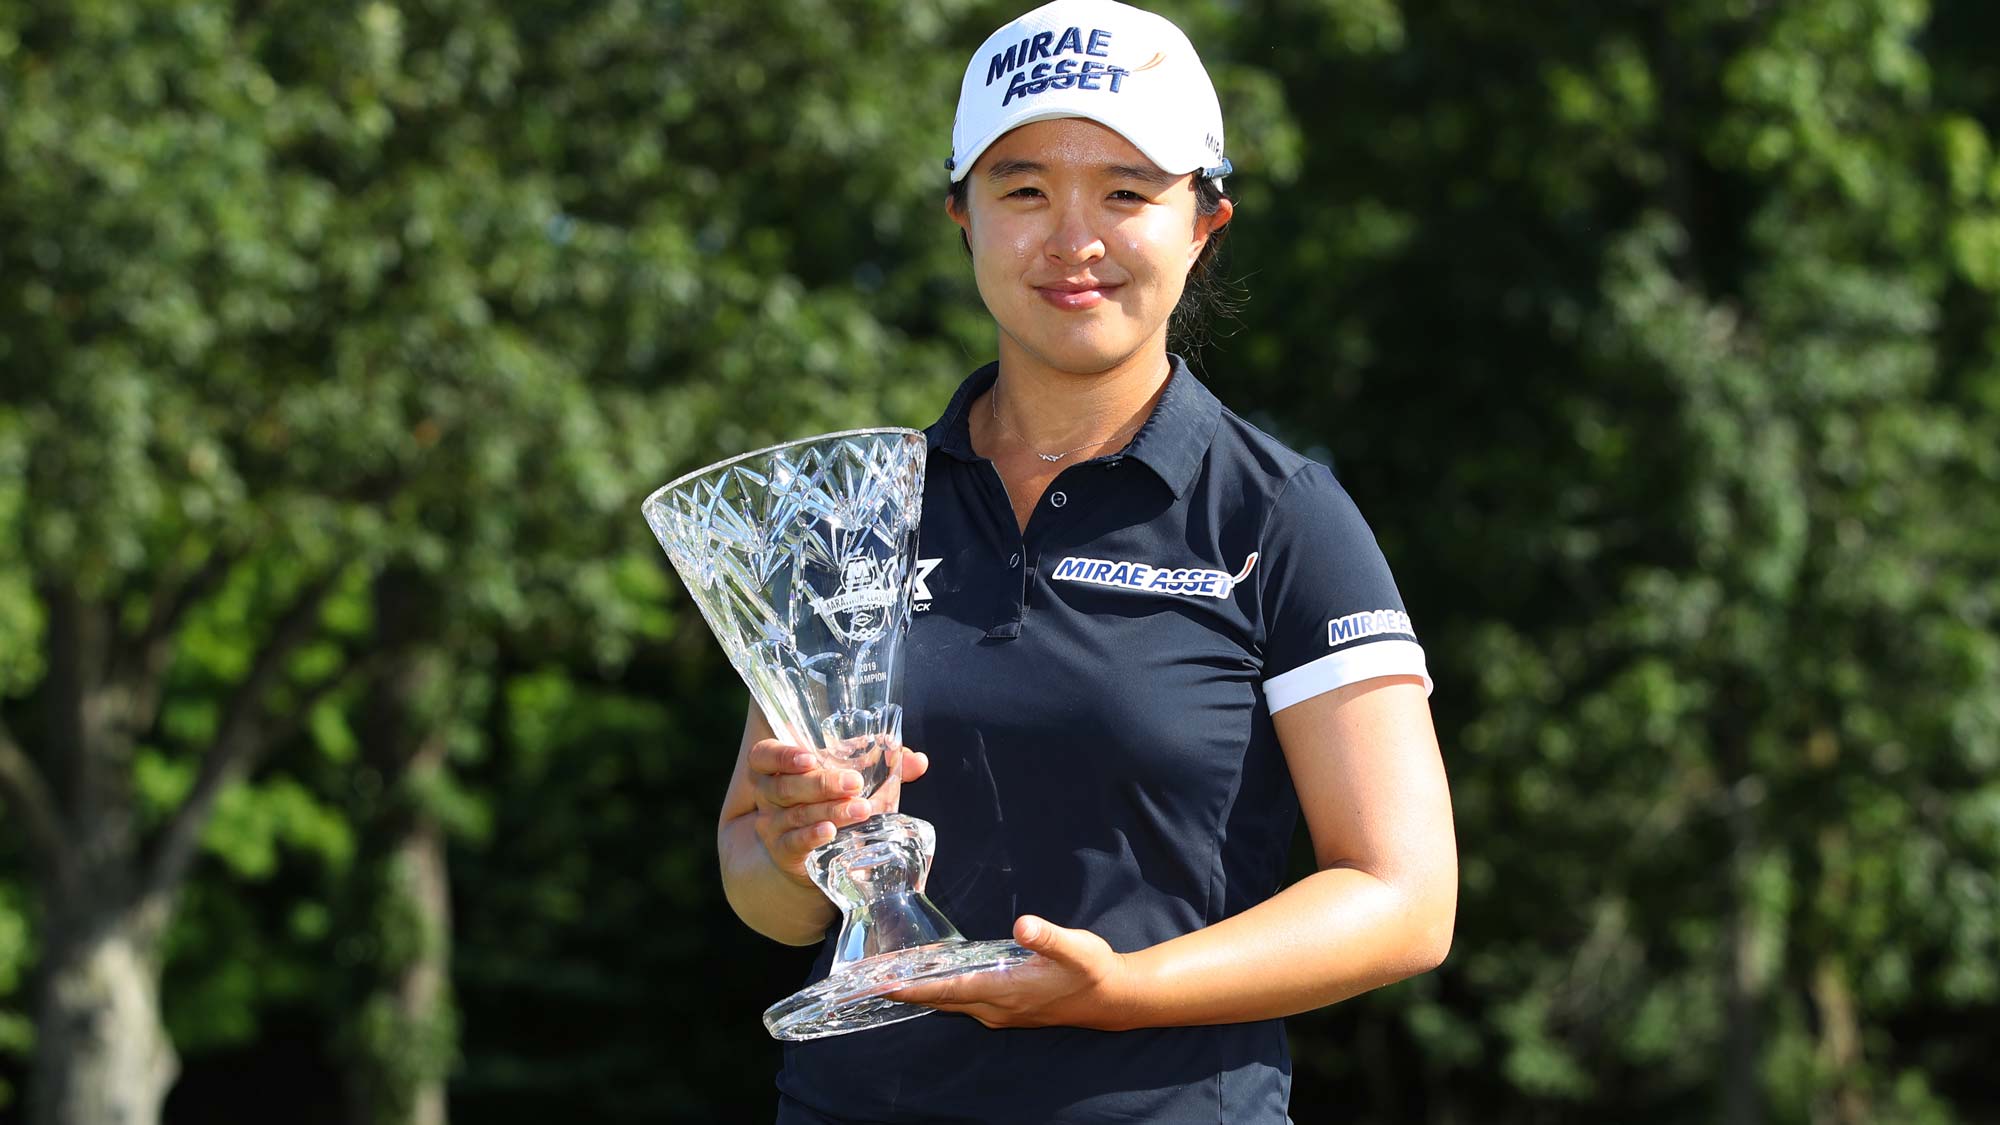 Sei Young Kim has her #BagsPacked for the 2020 Diamond Resorts Tournament of Champions after her win at the Marathon Classic